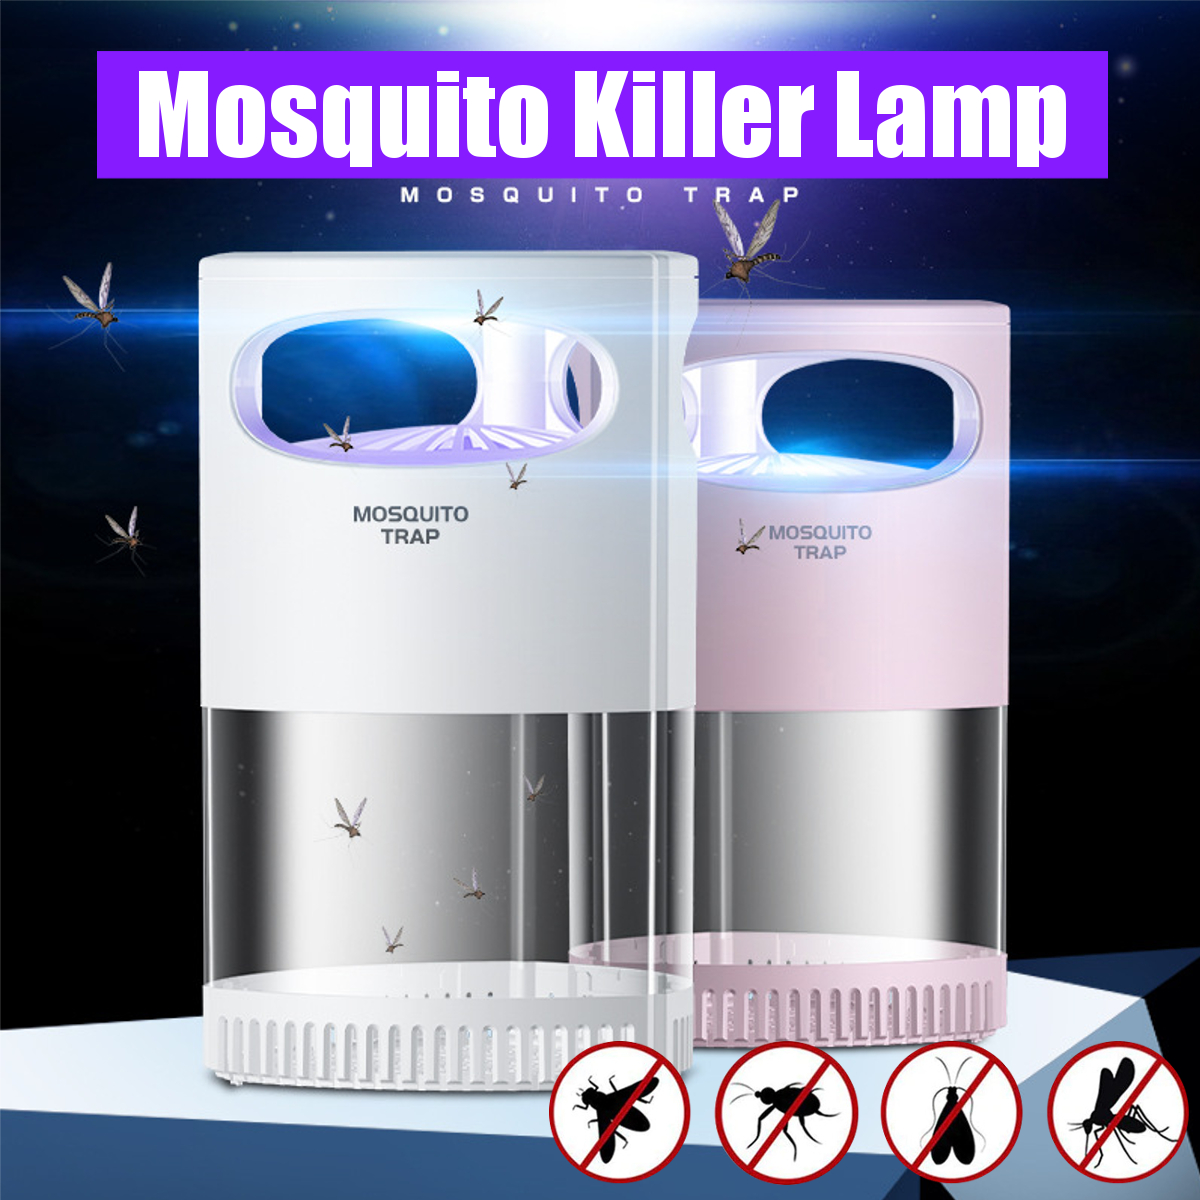 Mosquito-Killer-Lamp-USB-Electric-Photocatalytic-Bug-Repellent-Insect-Trap-Light-1679763-1